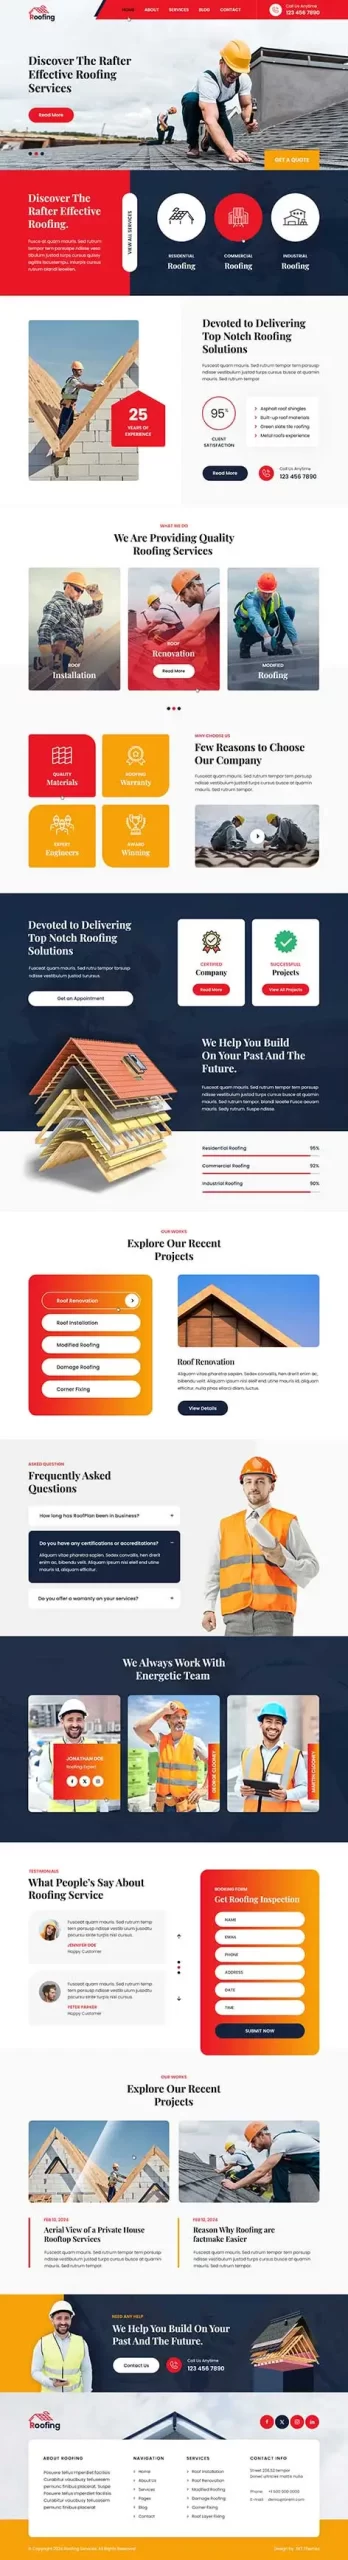 Roofing Services Company WordPress Theme